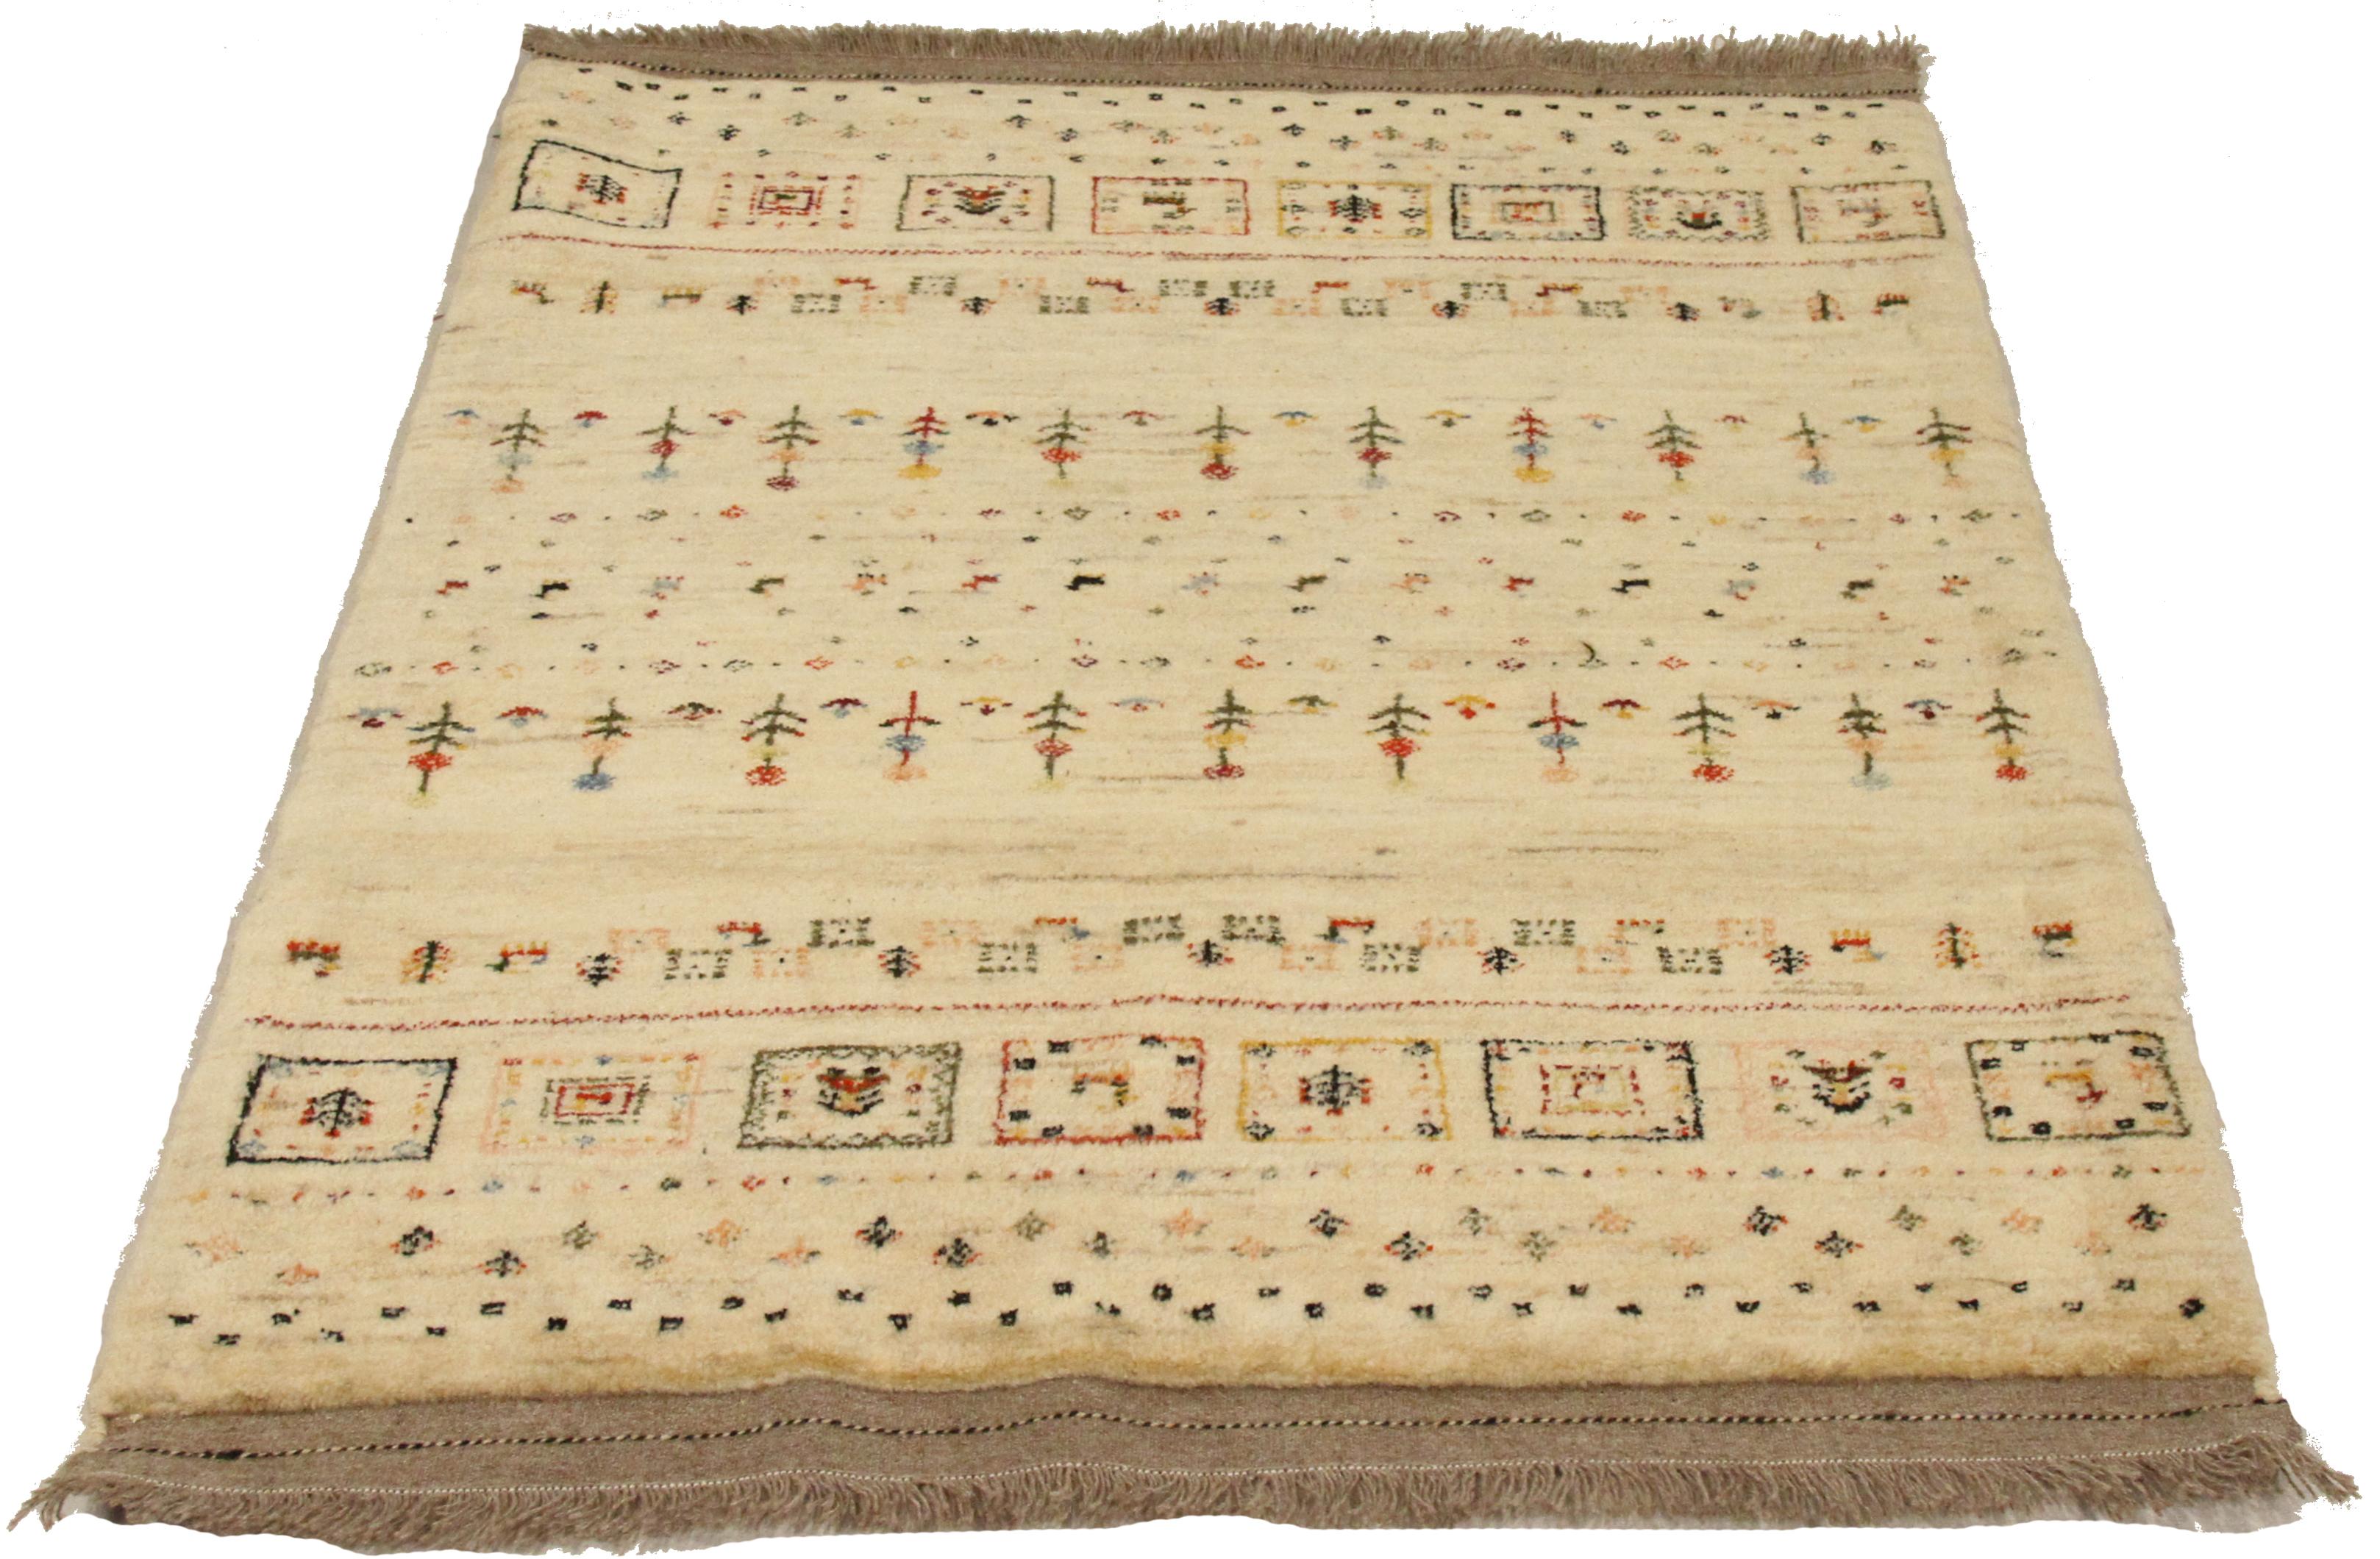 Vintage handwoven Persian rug made from fine wool and all-natural vegetable dyes that are safe for people and pets. This beautiful piece features simple geometric patterns which Gabbeh rugs are known for. Persian tribal rugs like Gabbeh are highly